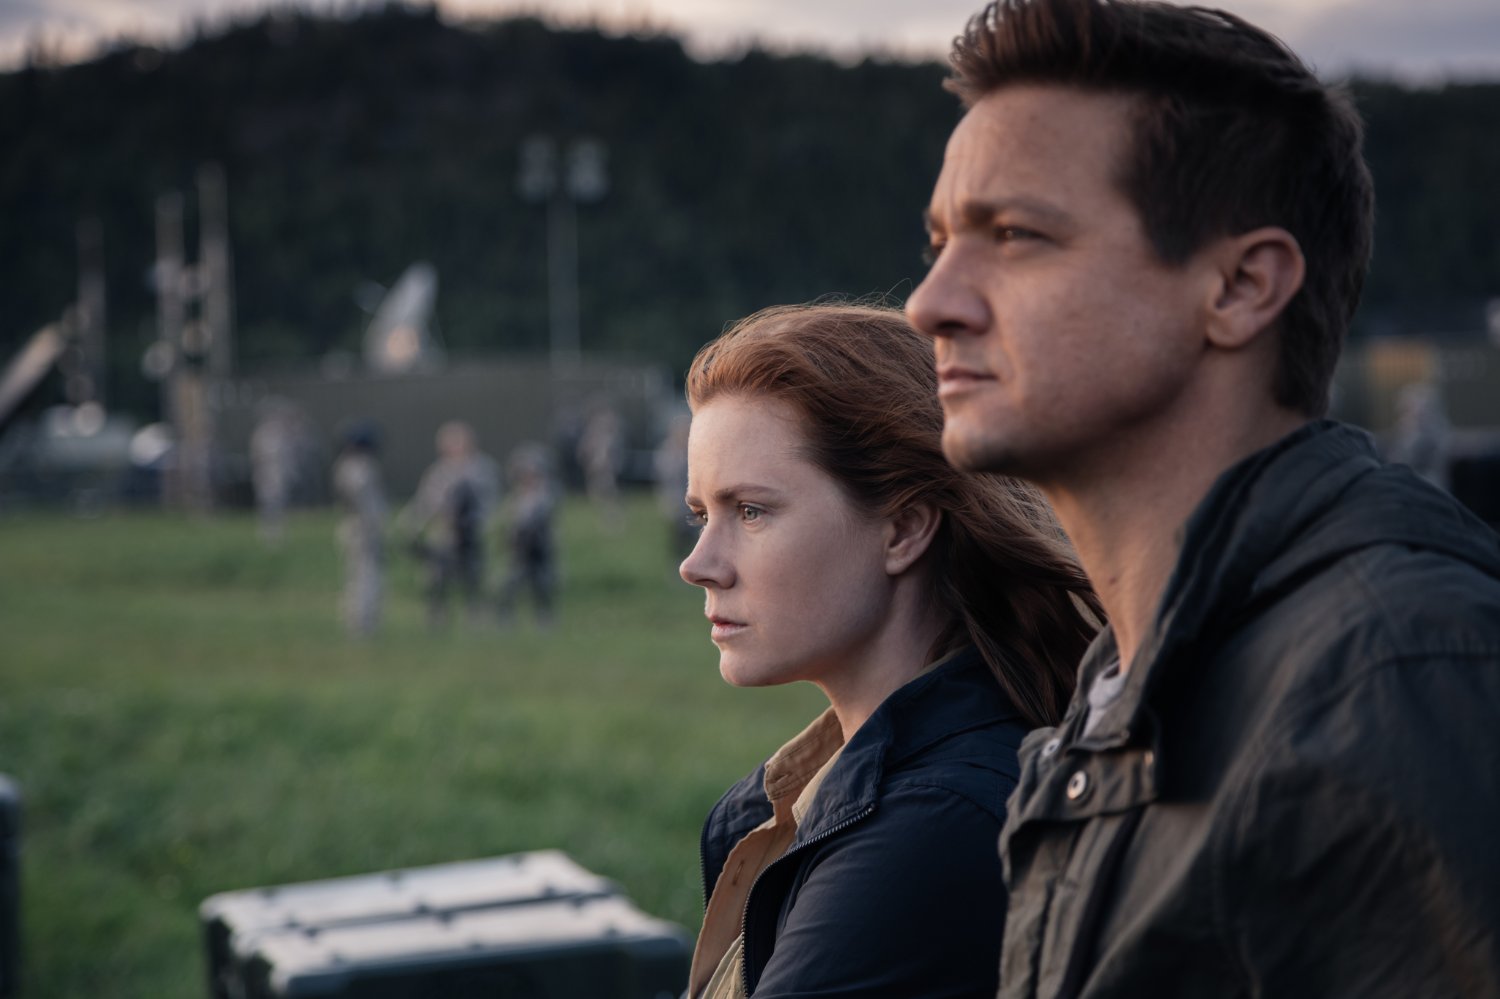 arrival-movie-review-3 (1)